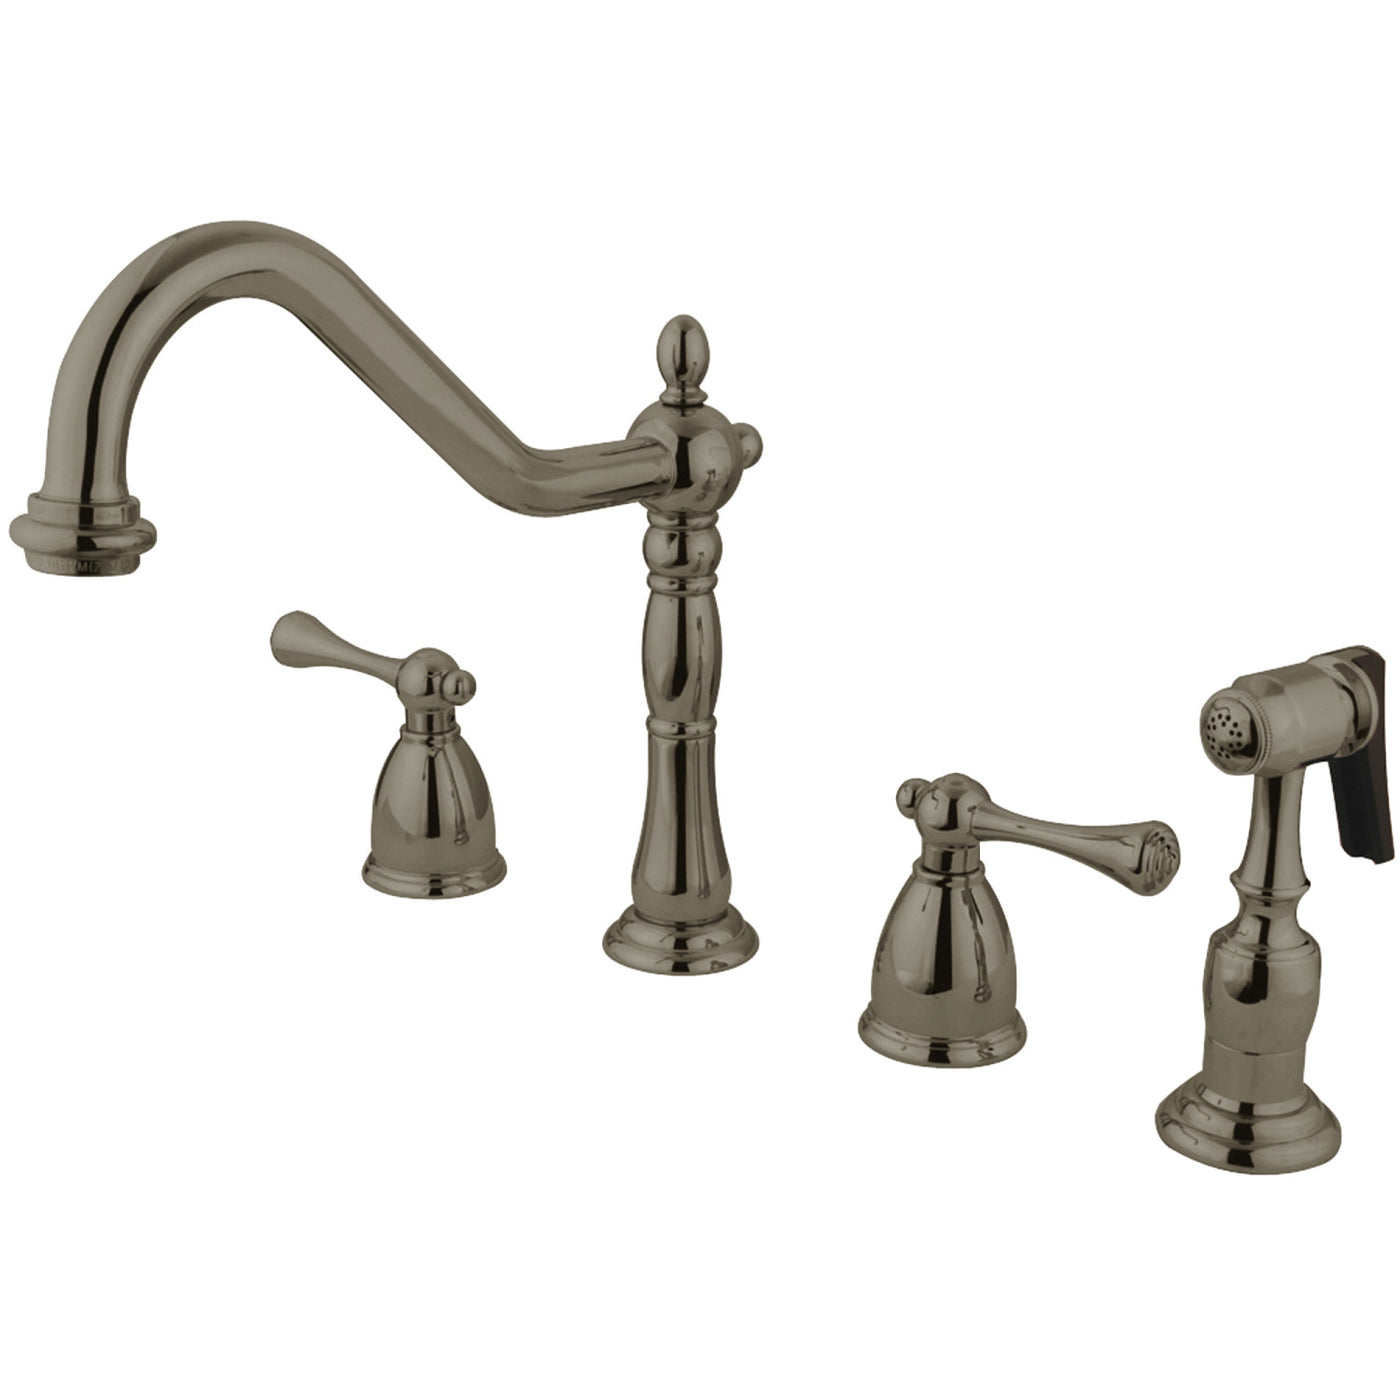 Elements of Design EB7798BLBS Widespread Kitchen Faucet with Brass Sprayer, Brushed Nickel